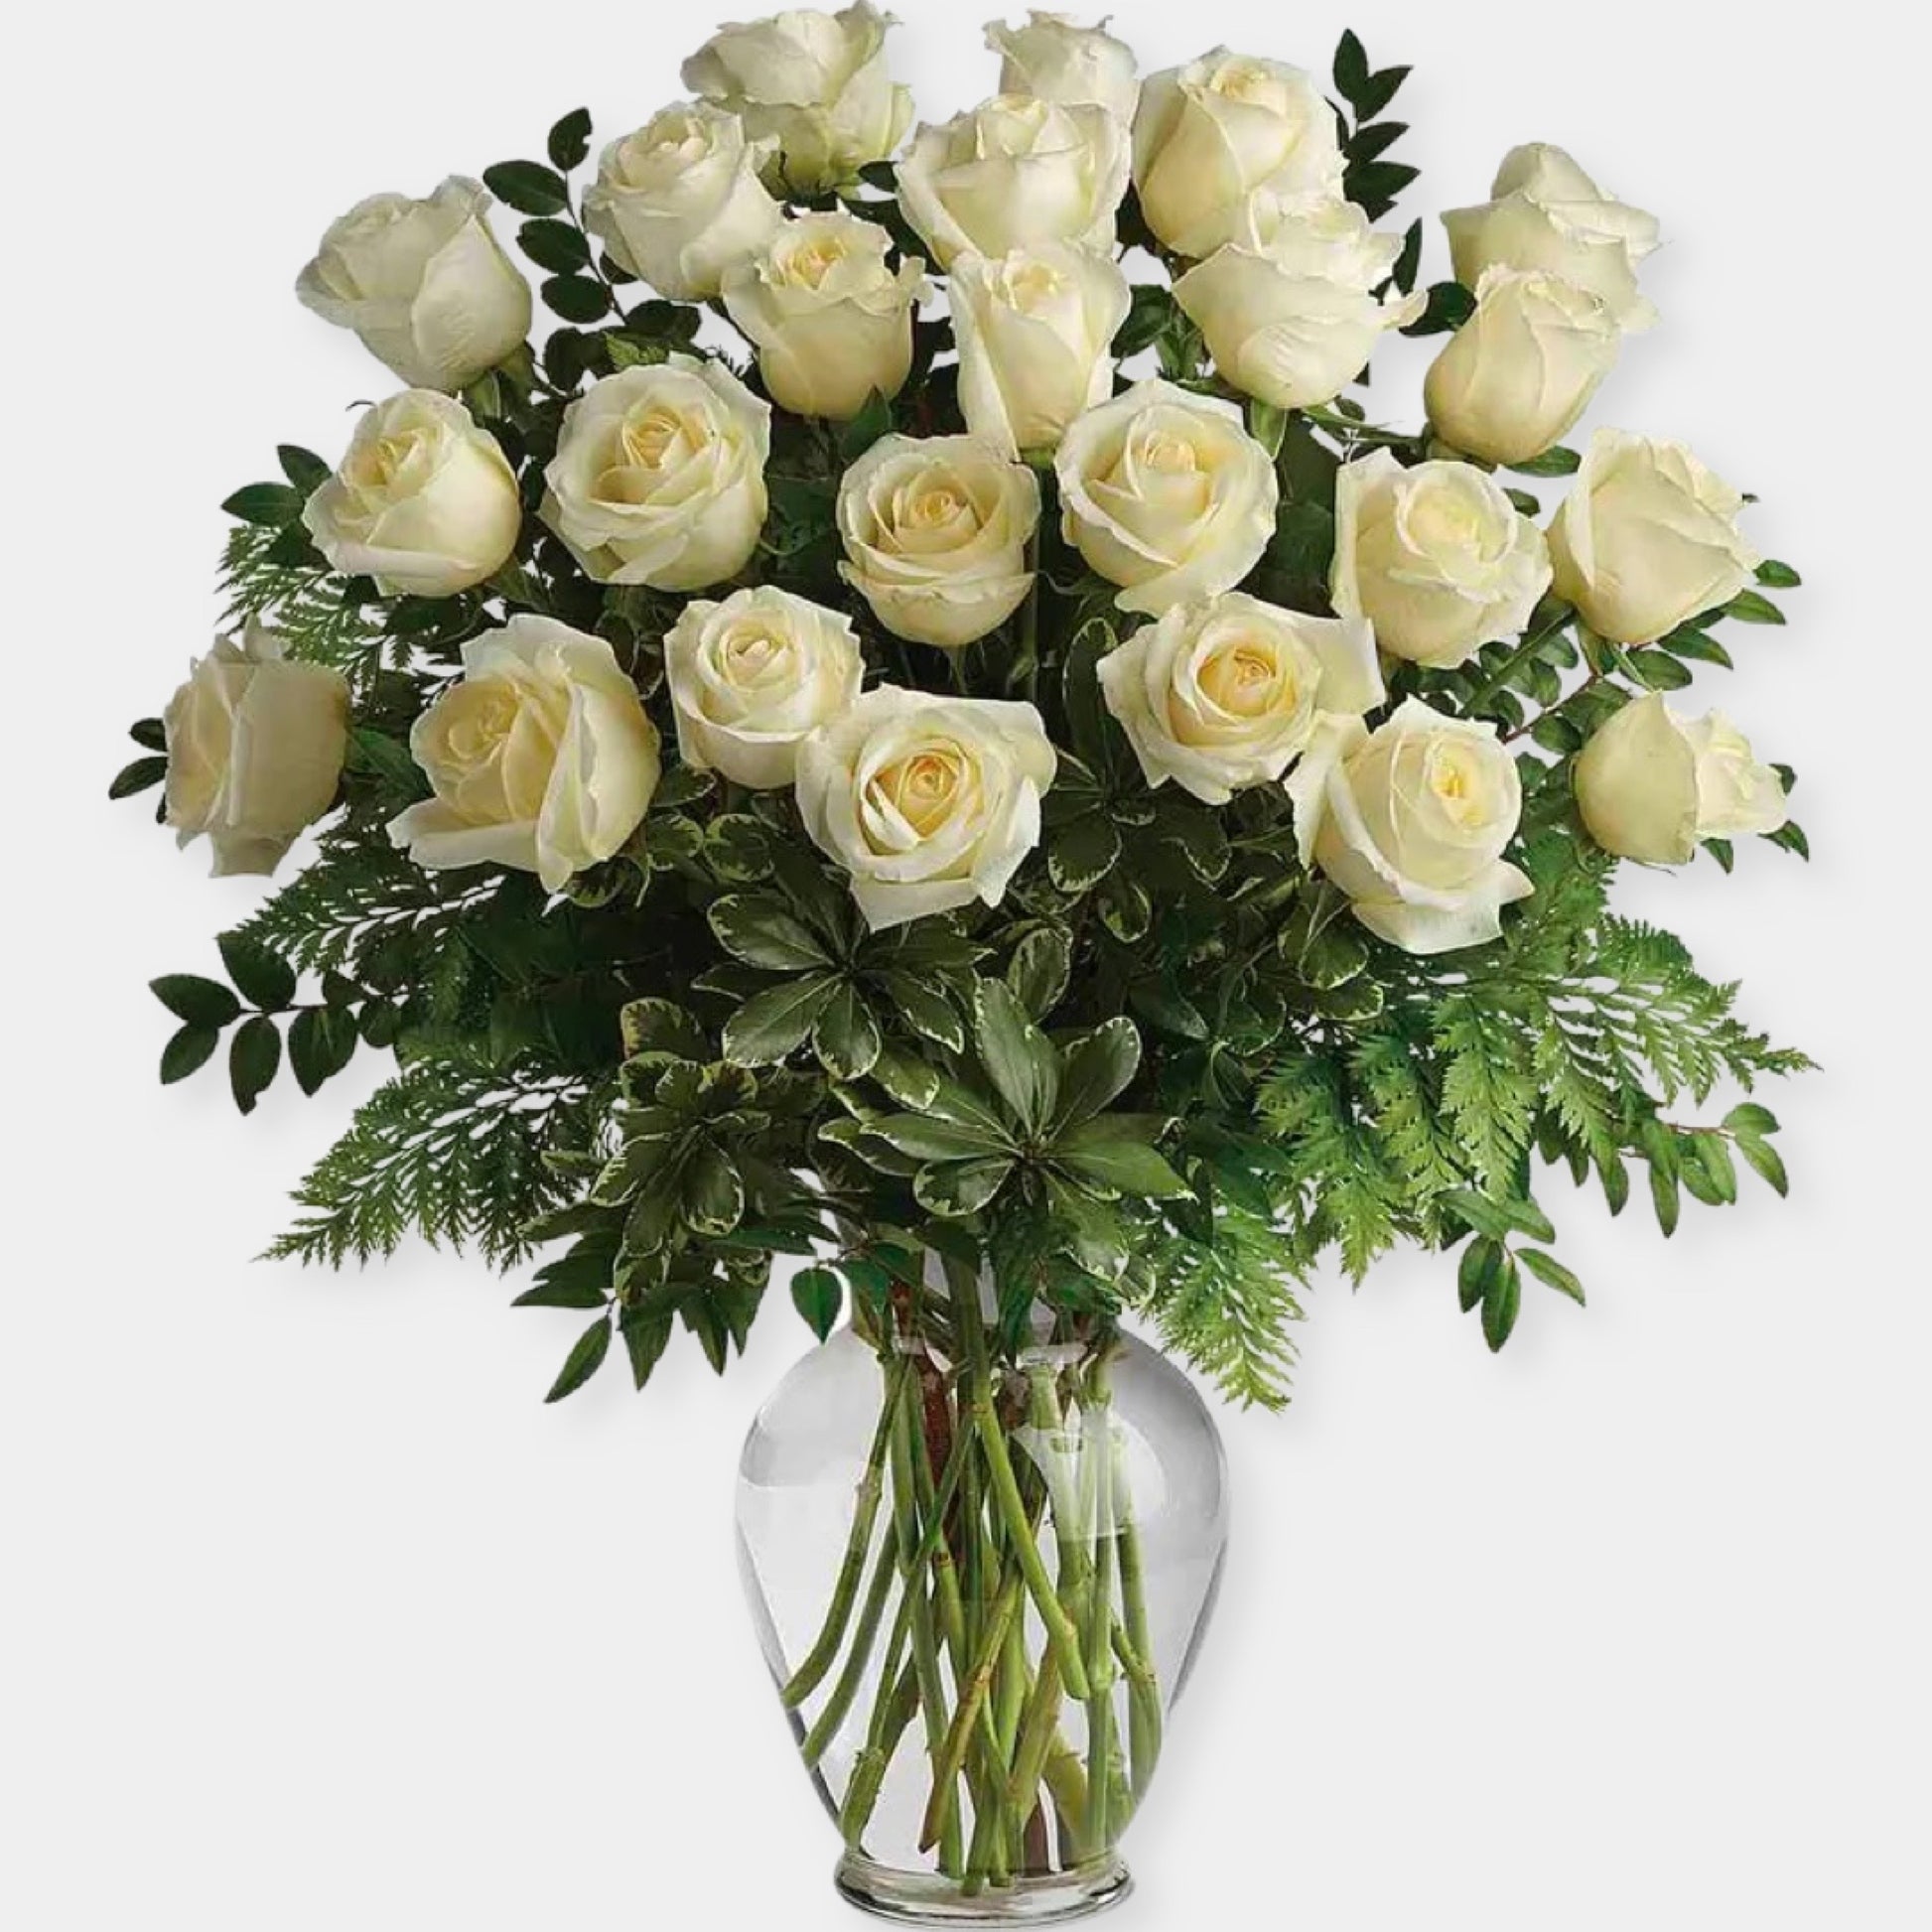 White roses bouquet "Bianca"